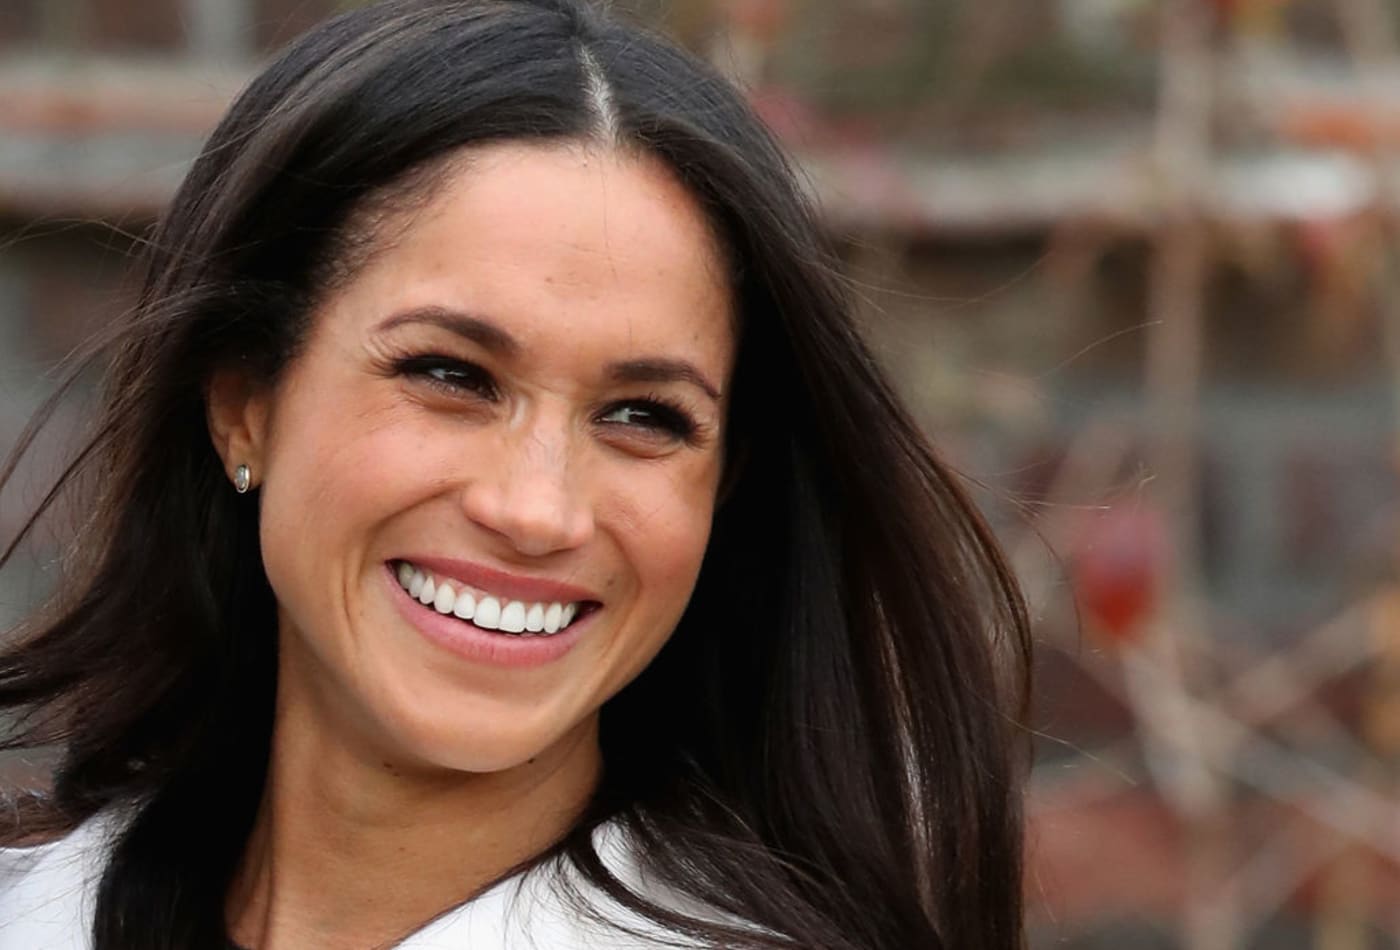 Meghan Markle Visits South Africa to Speak on Behalf of Education